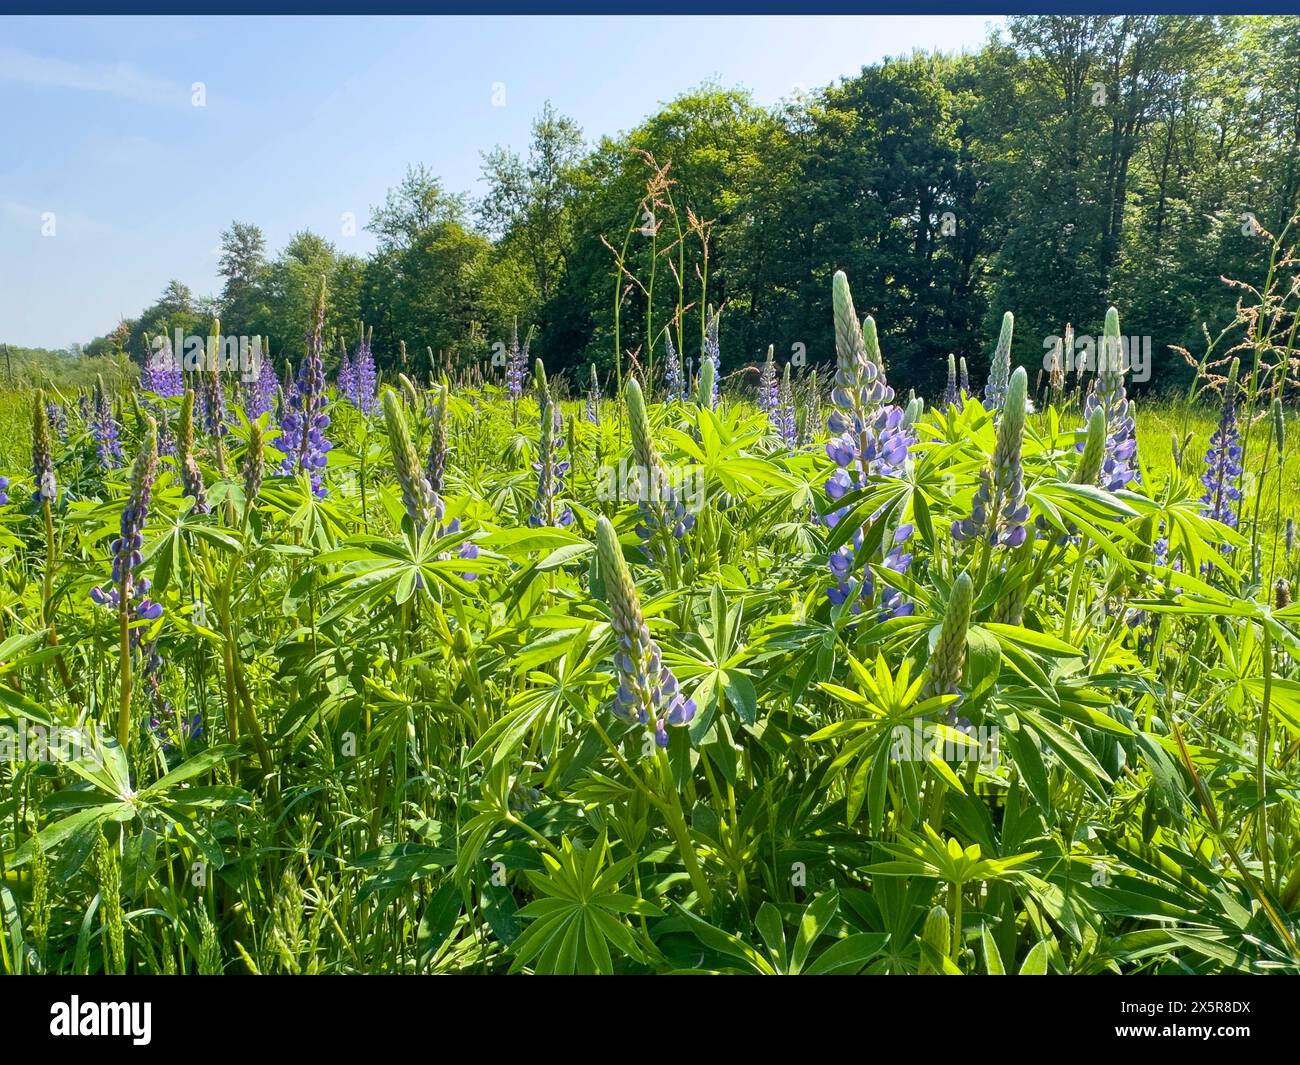 Wild Narrow-leaved lupin (Lupinus angustifolius) growing in the wild in a landscape conservation area, Grafenwald, North Rhine-Westphalia, Germany, Eu Stock Photo